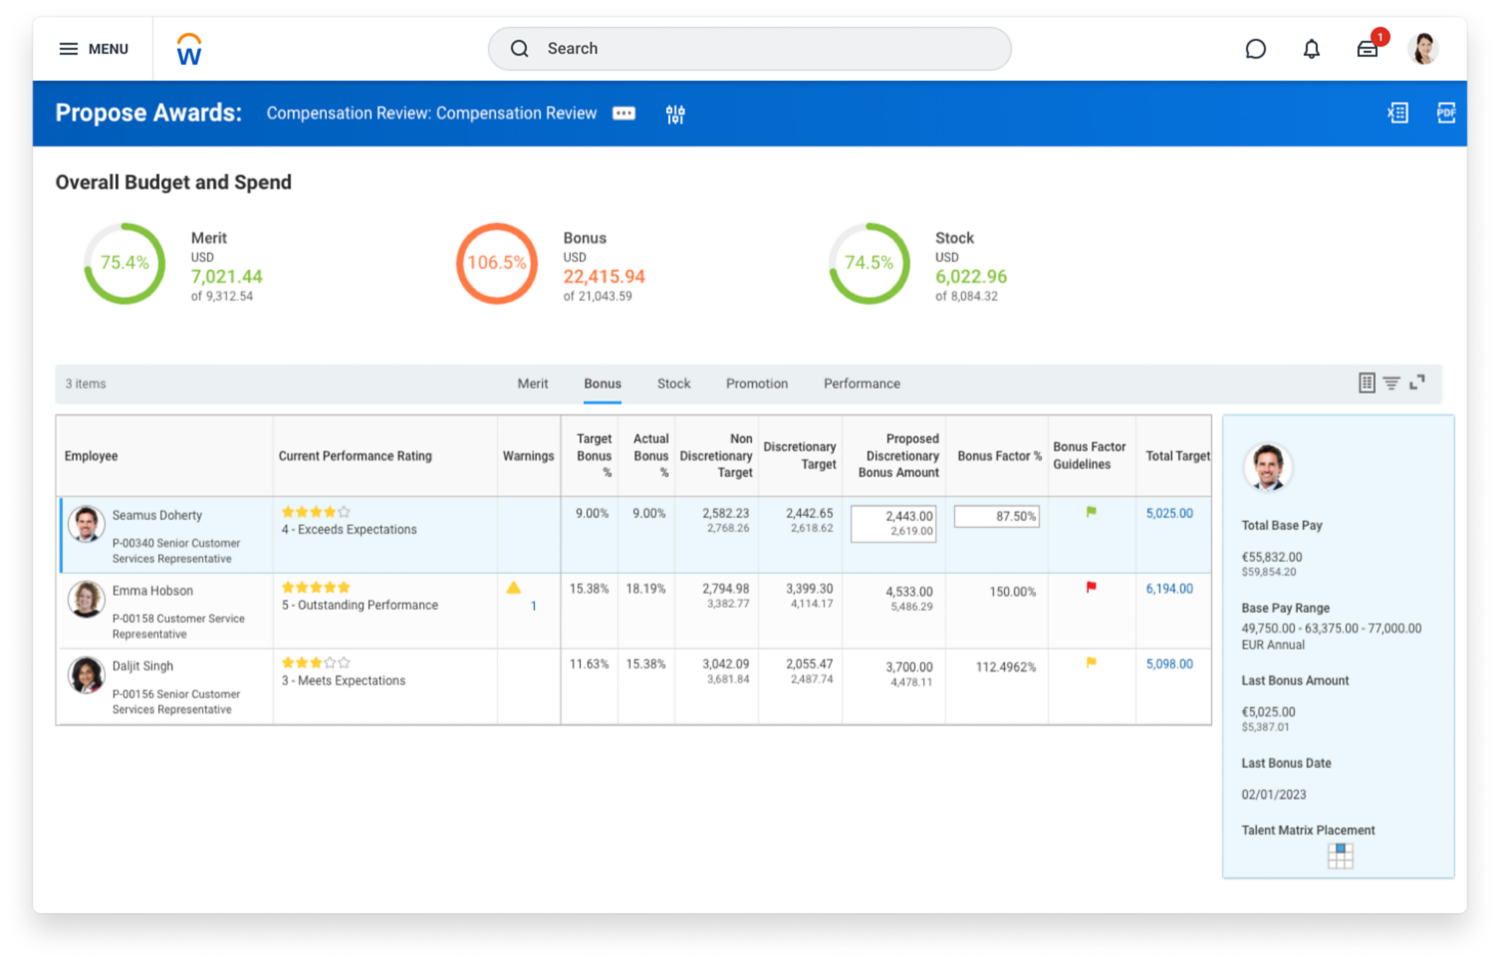 Compensation management dashboard showing organization summary with overall budget and spend.